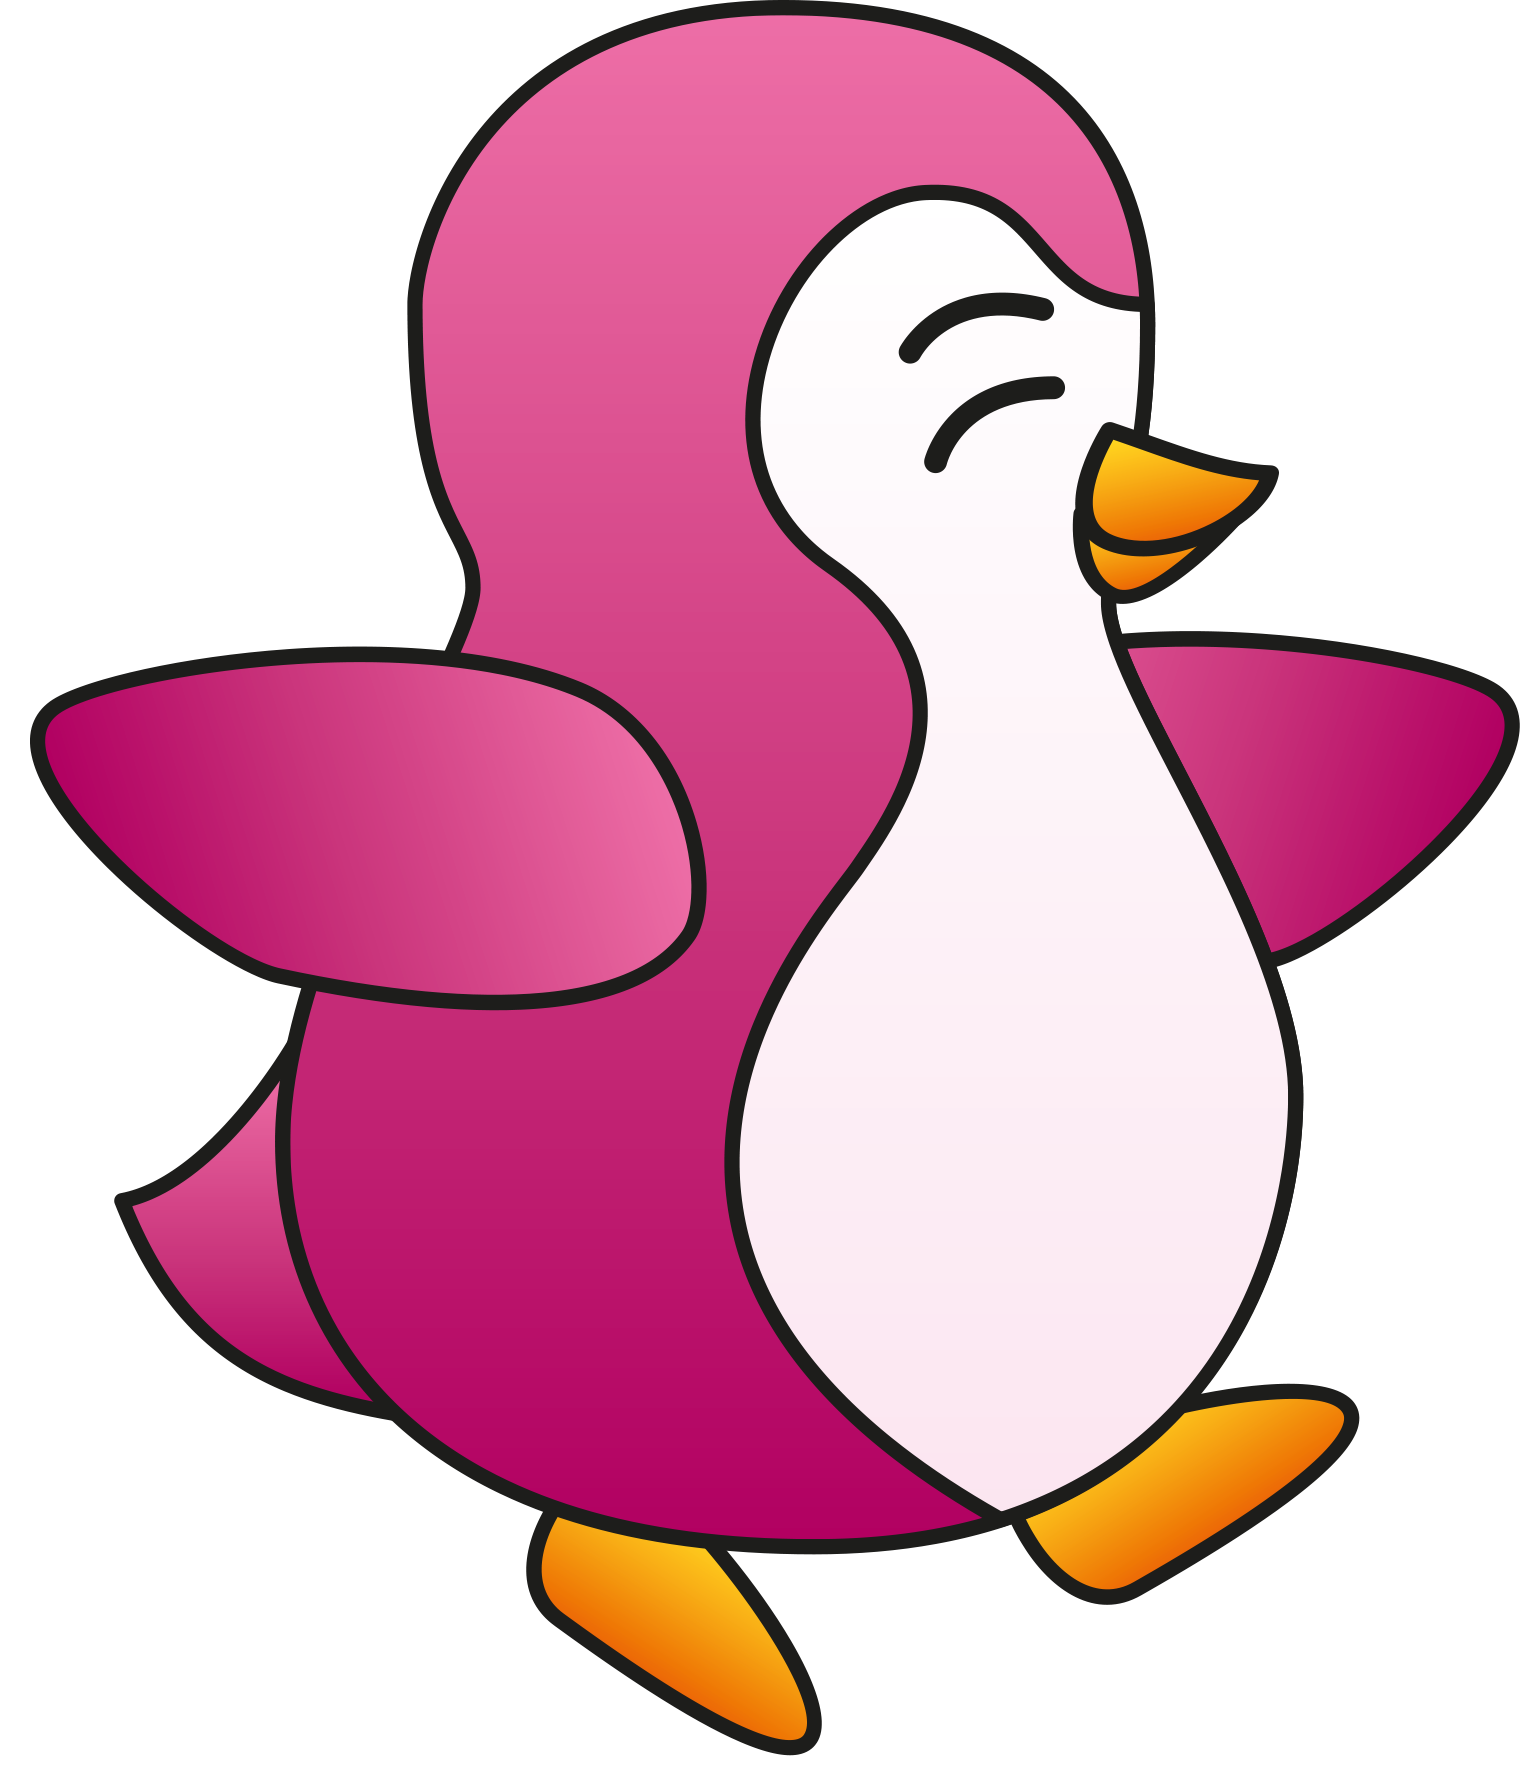 Cute Penguin Free Download Image PNG Image